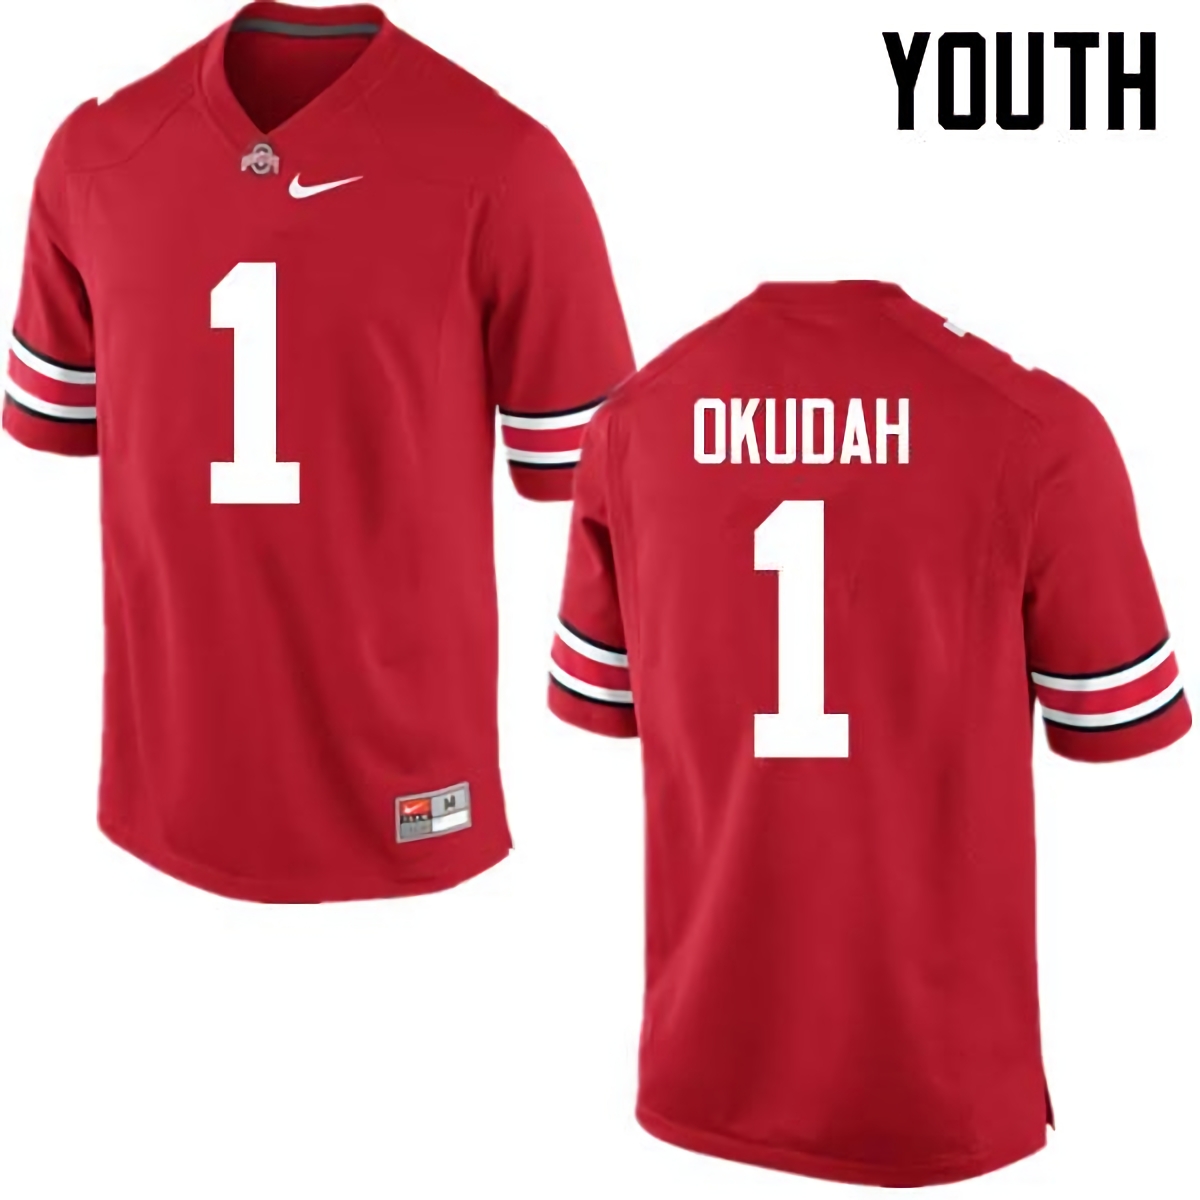 Jeffrey Okudah Ohio State Buckeyes Youth NCAA #1 Nike Red College Stitched Football Jersey DYX8656RK